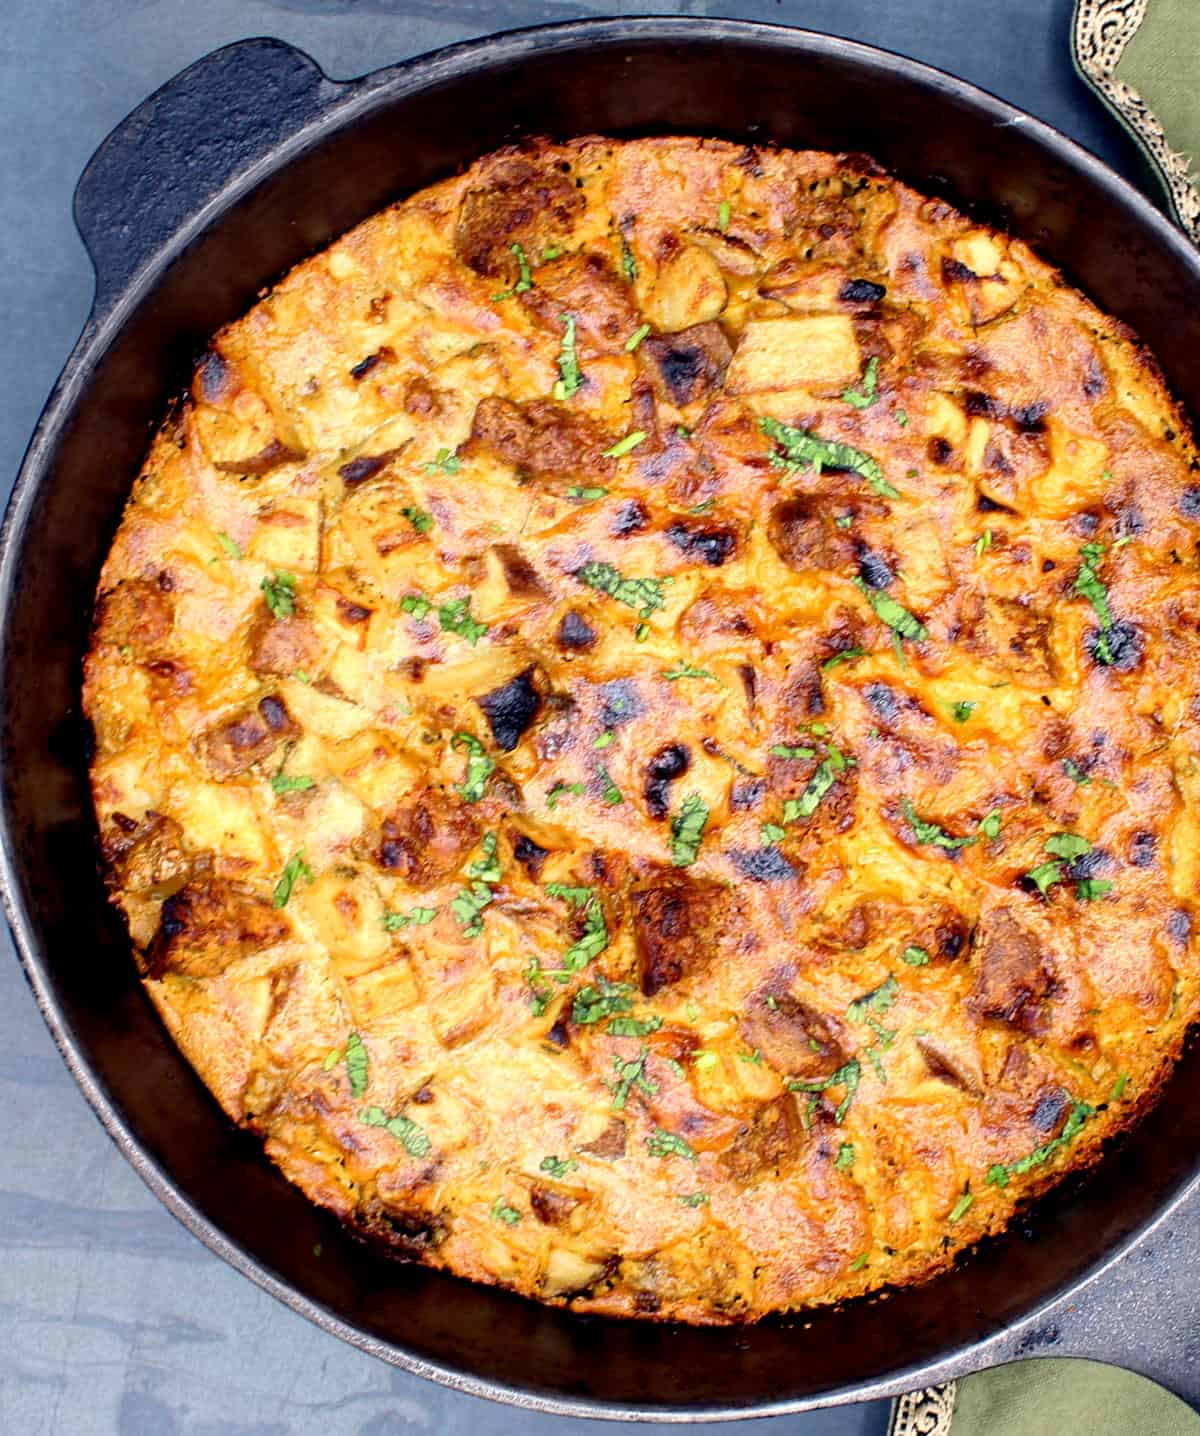 Vegan breakfast casserole with potatoes and vegan sausage and cheesy cashew cream, in black cast iron griddle.